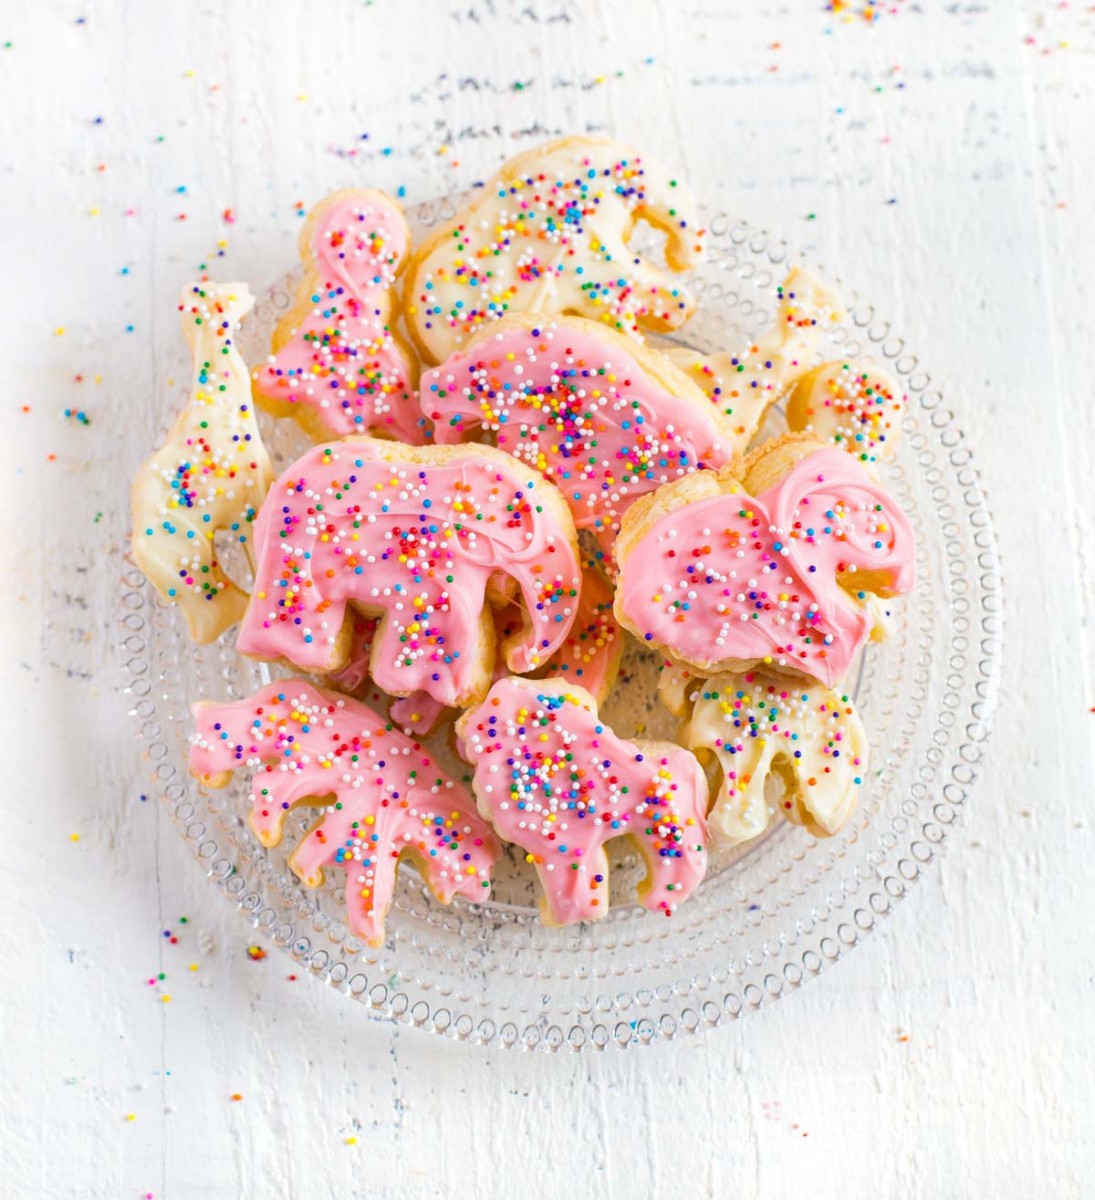 Frosted Animal Crackers Easy Homemade Recipe!